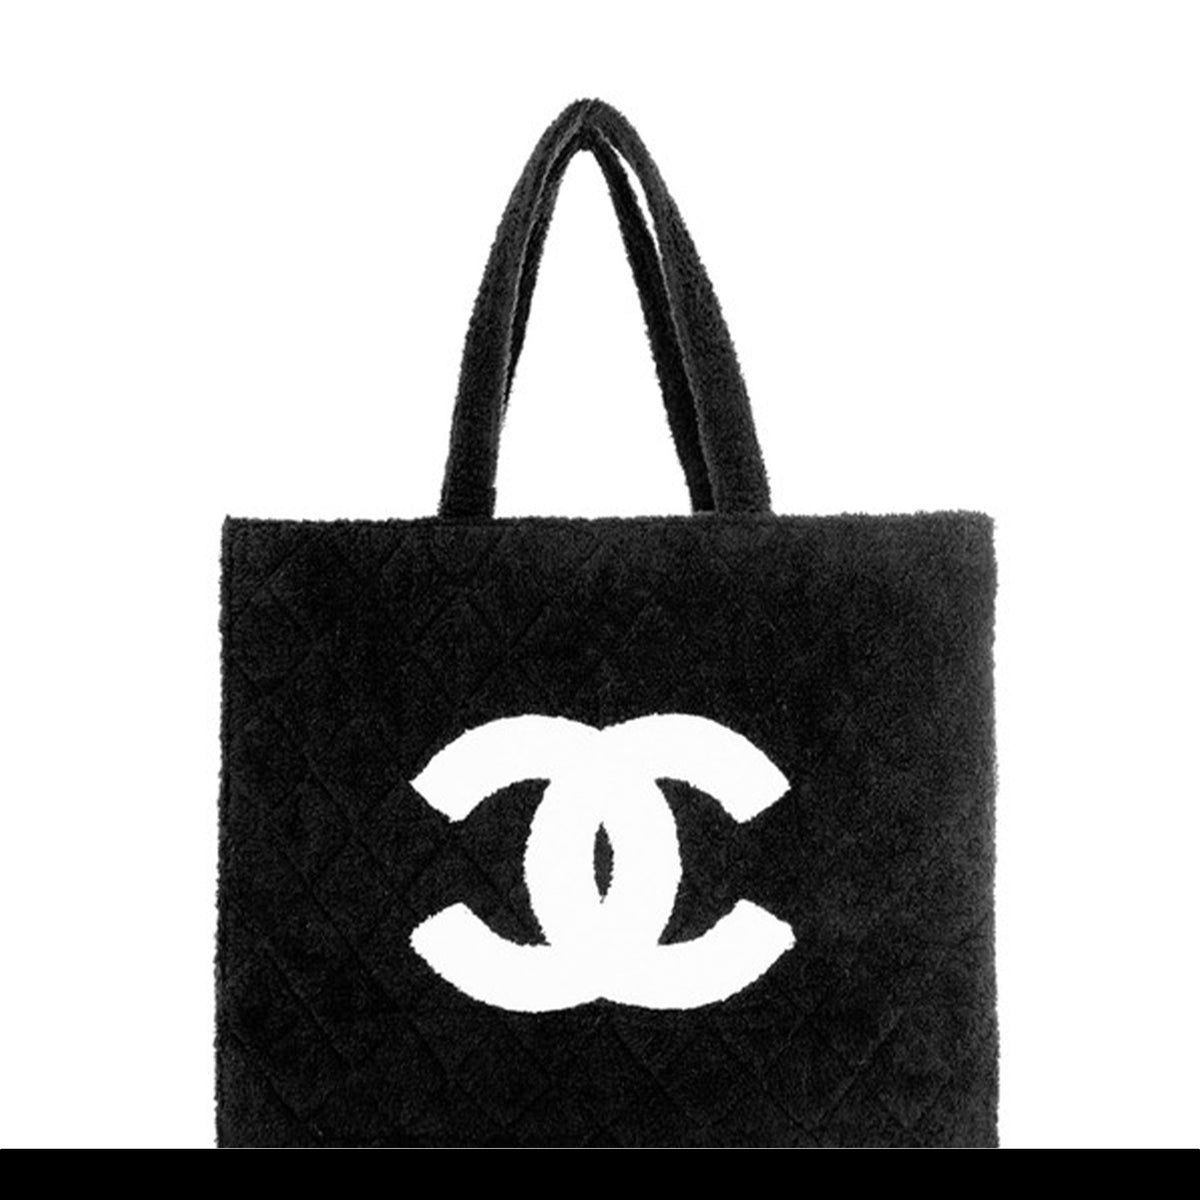 Chanel Cruise 2018 Runway Bag Collection